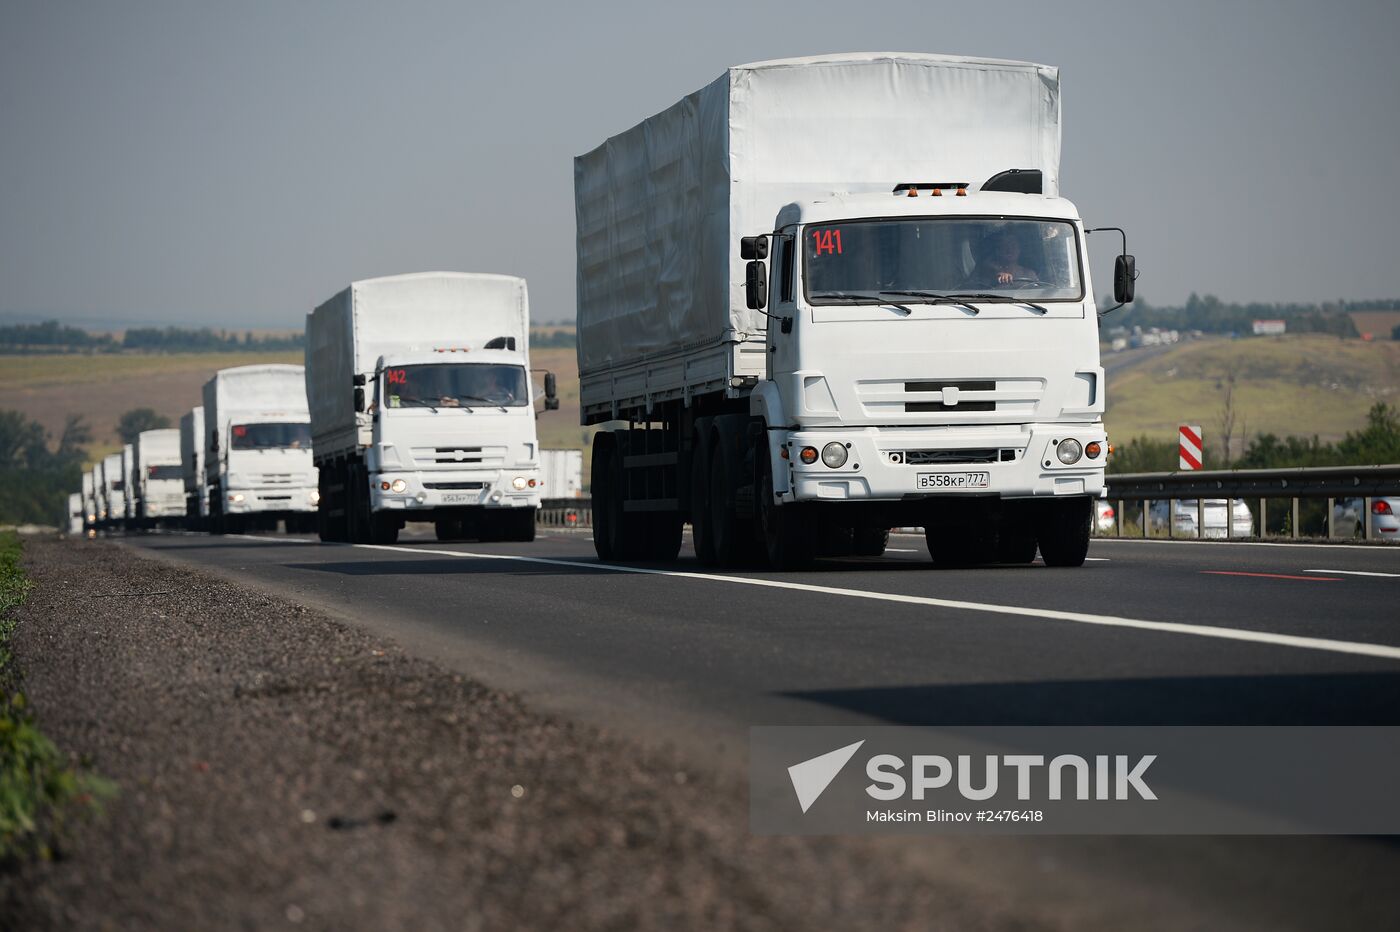 Russia's humanitarian aid for Ukraine continues journey